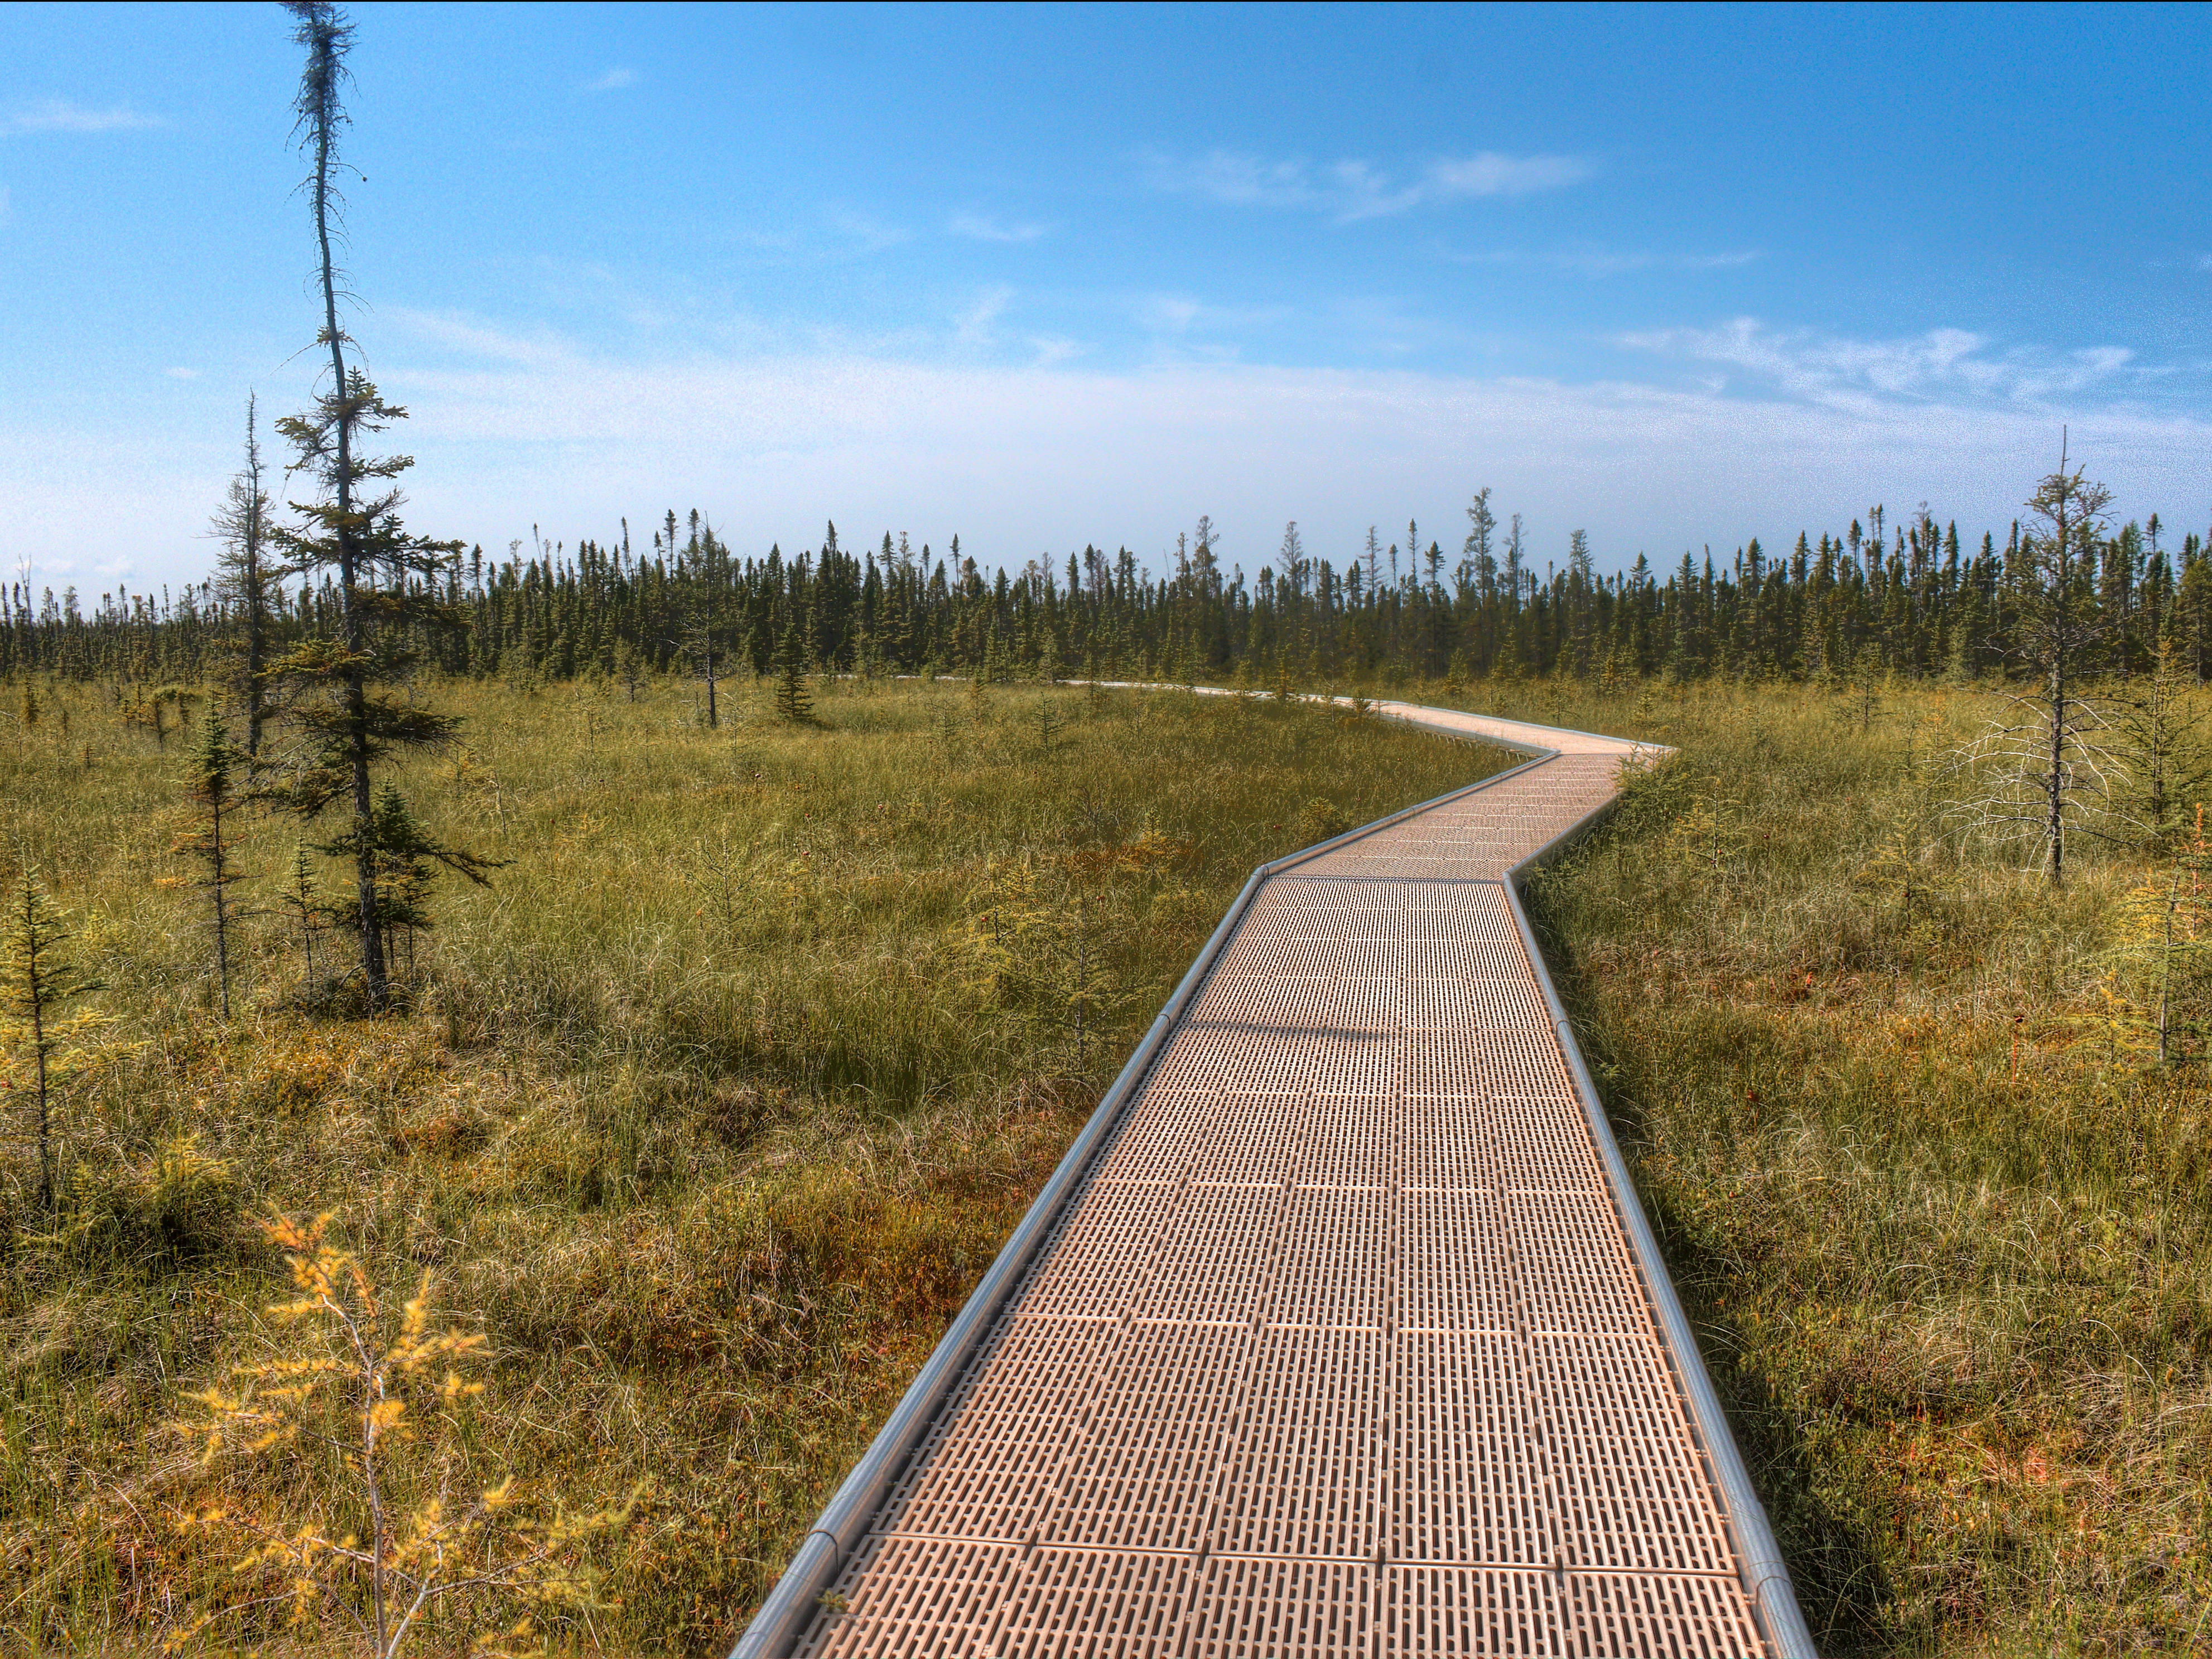 <p>A boardwalk allows visitors to take in all the views of the <a href="https://www.dnr.state.mn.us/state_parks/park.html?id=sra00308#homepage">500-square mile peat bog</a>. </p><p>Wander through the stunted tamarack and spruce forest on the mile-long trail, and at the end, you'll be treated to a viewing platform, benches, and a binocular viewer.</p><p>Since the trail is made of a raised boardwalk, it is accessible for strollers, wheelchairs, and less-experienced hikers. </p>